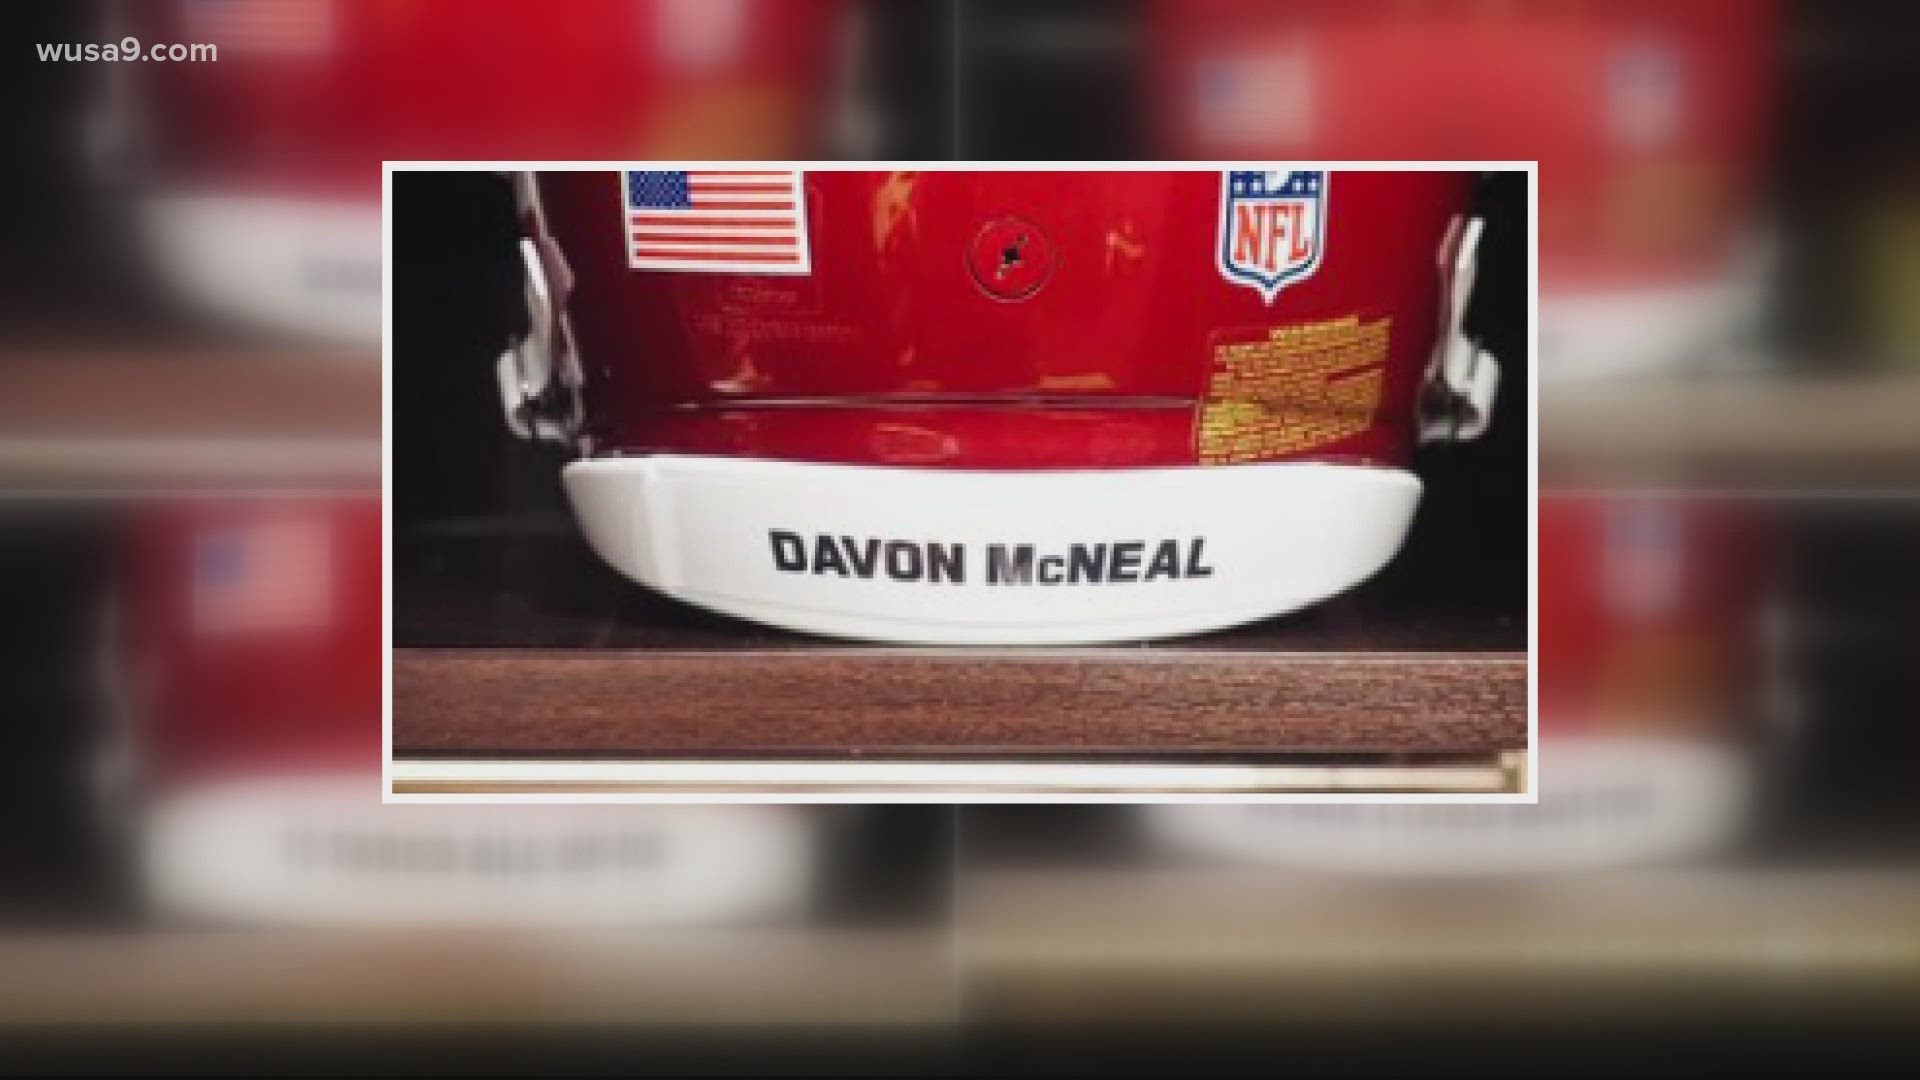 Davon McNeal was shot and killed on July 4 before heading to a family picnic. His name will be on the helmets of several WFT players Sunday.